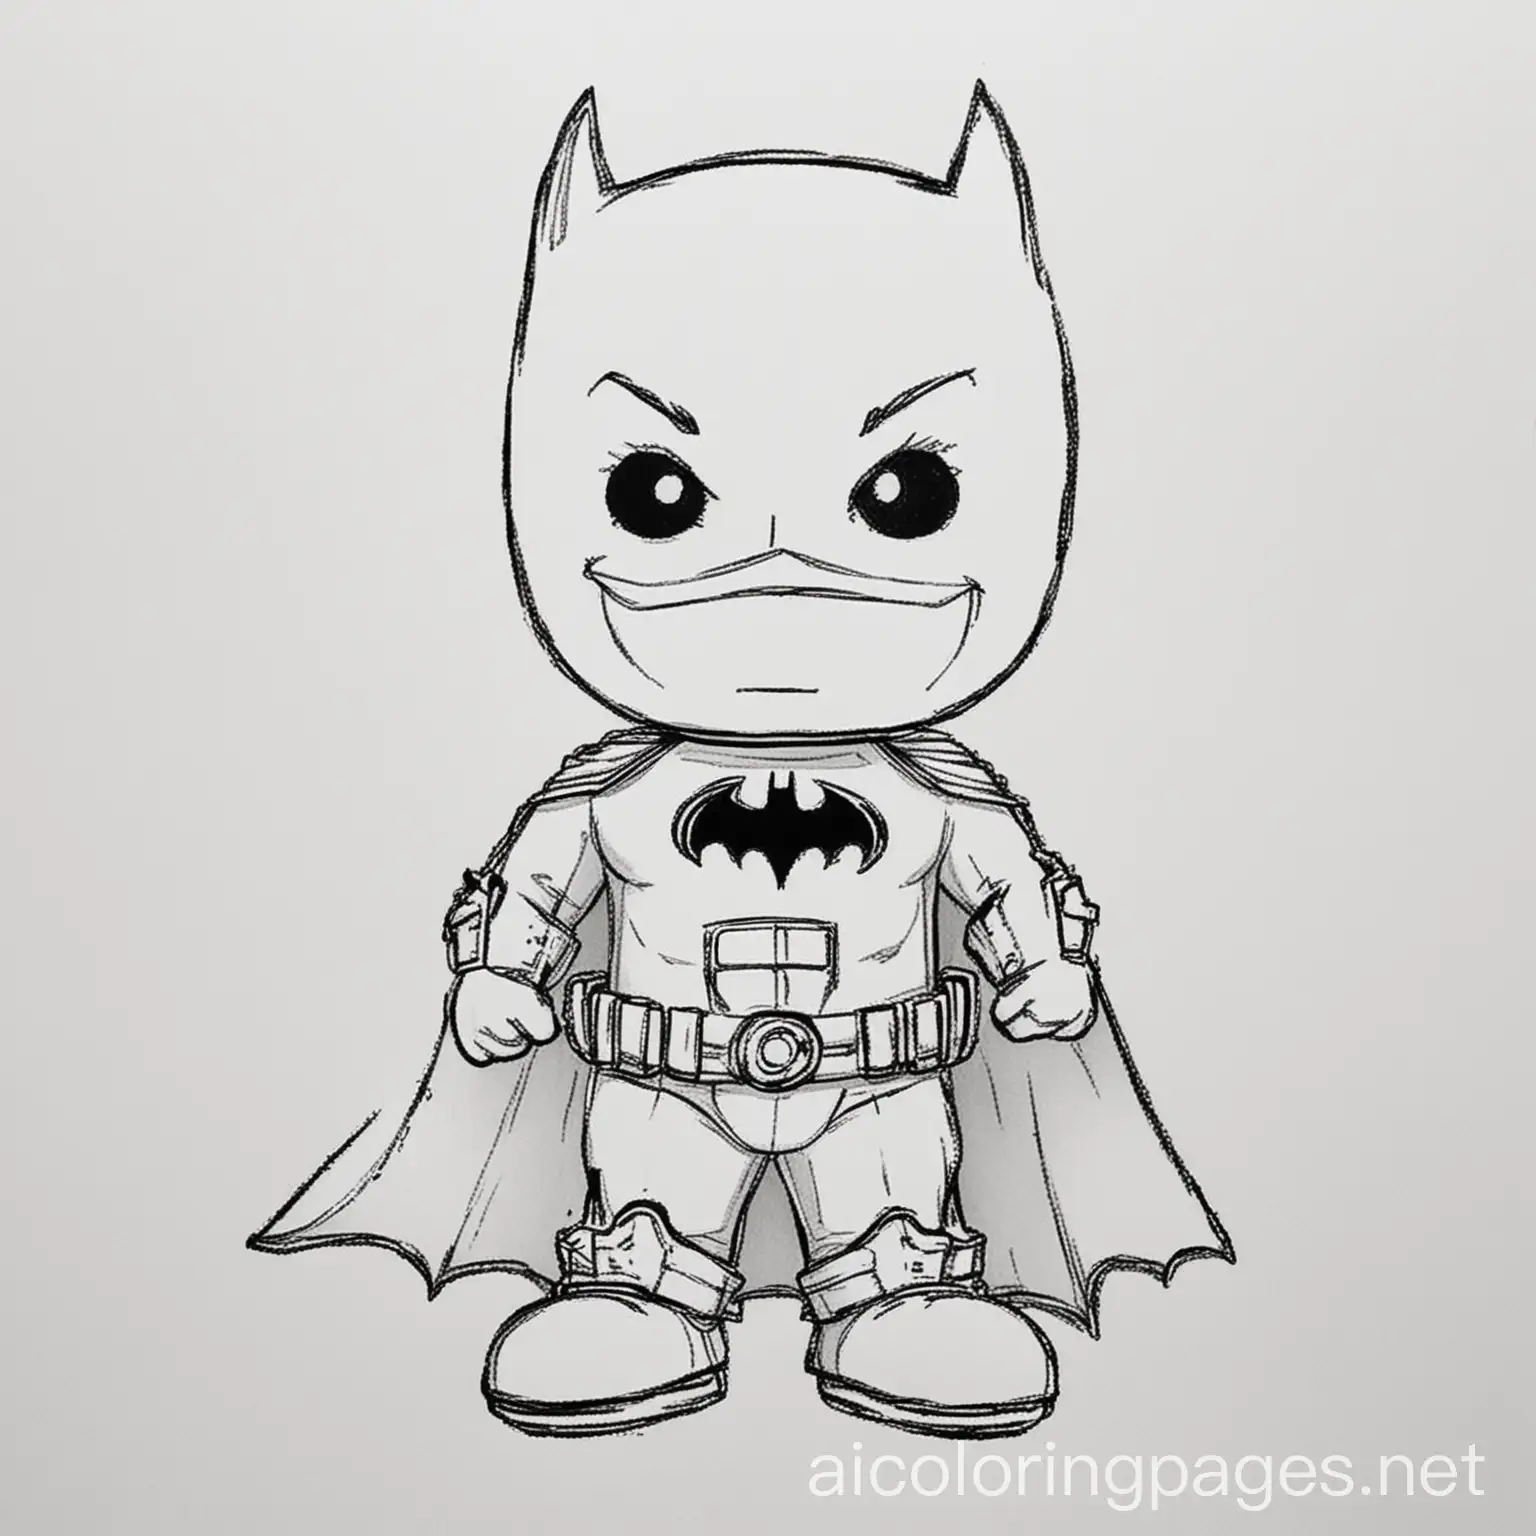 Simple-Coloring-Page-Cute-Batman-in-Black-and-White-Line-Art